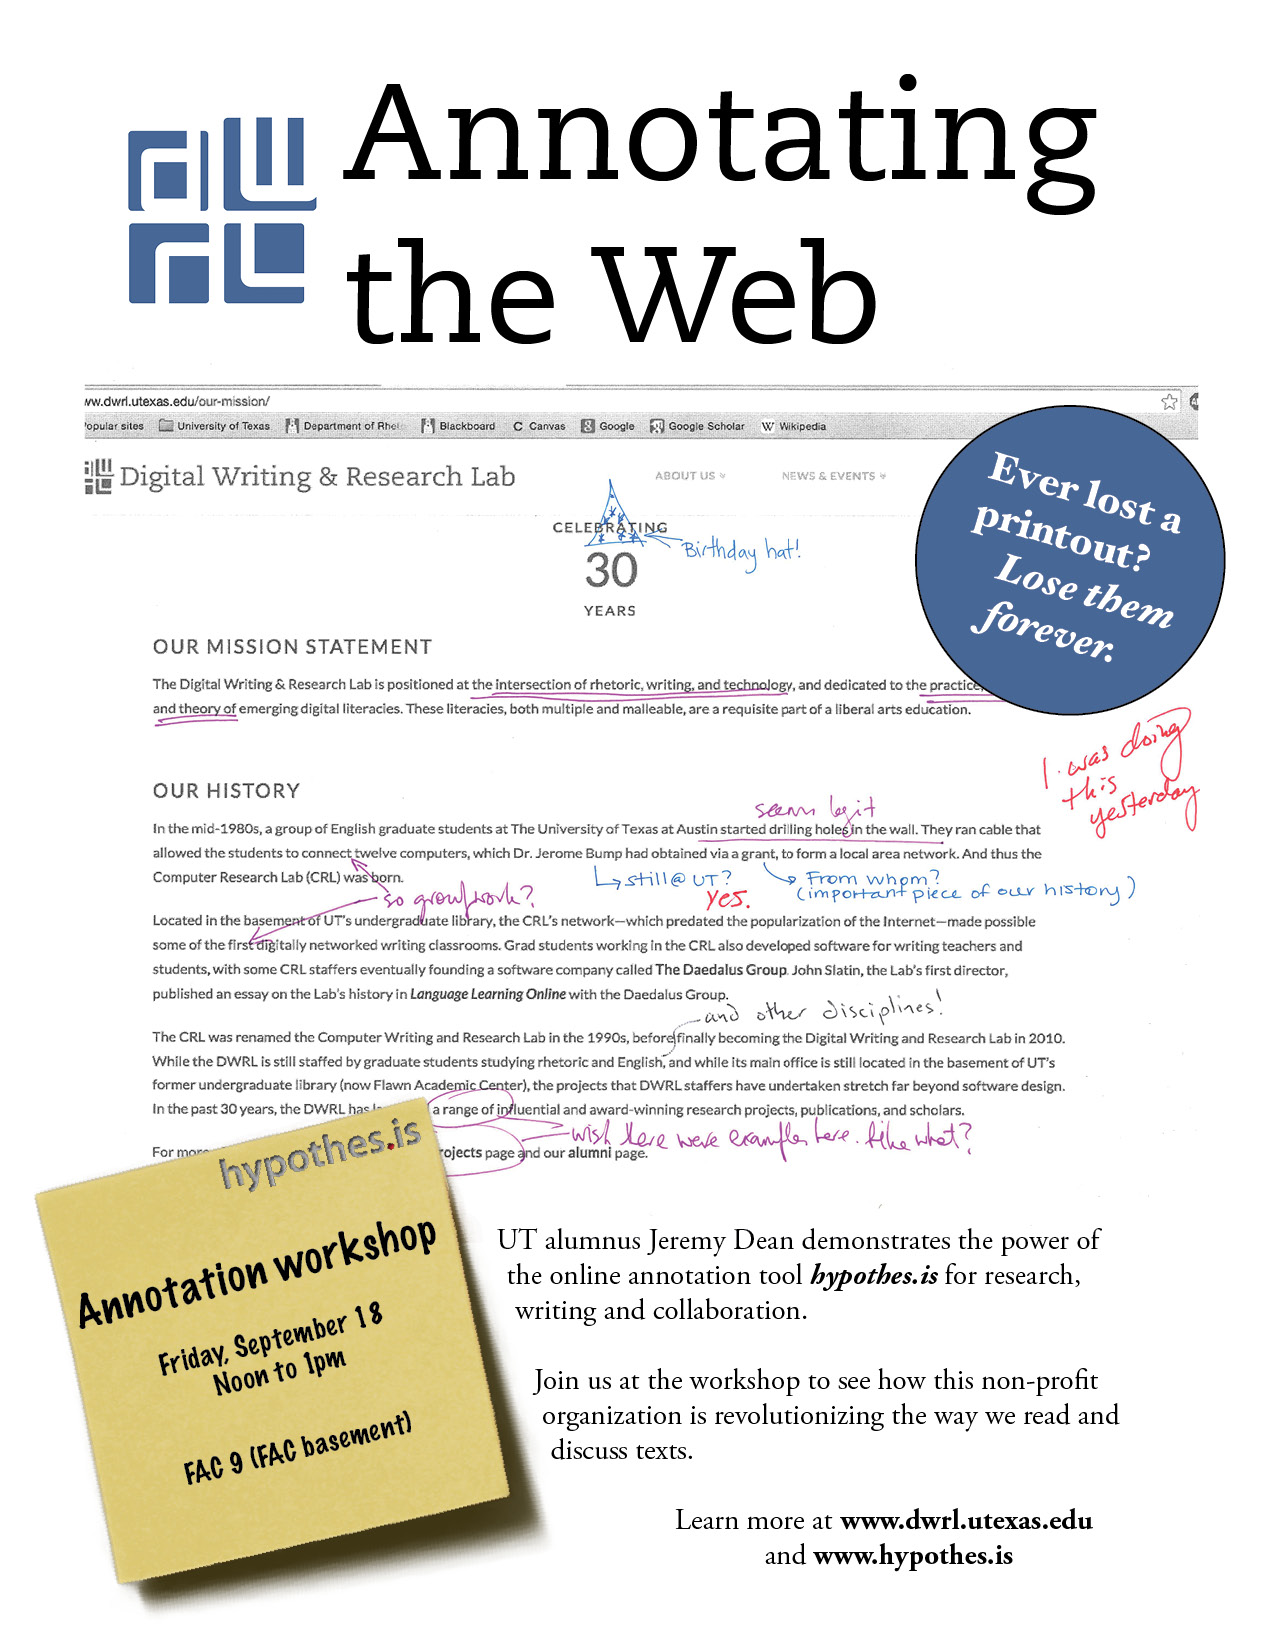 Flyer for the September 18, 2015 workshop on annotating the web using hypothes.is. UT alumnus Jeremy Dean demonstrates the power of the online annotation tool hypothes.is for research, writing and collaboration. Join us at the workshop to see how this non-profit organization is revolutionizing the way we read and discuss texts. Learn more at www.dwrl.utexas.edu and www.hypothes.is